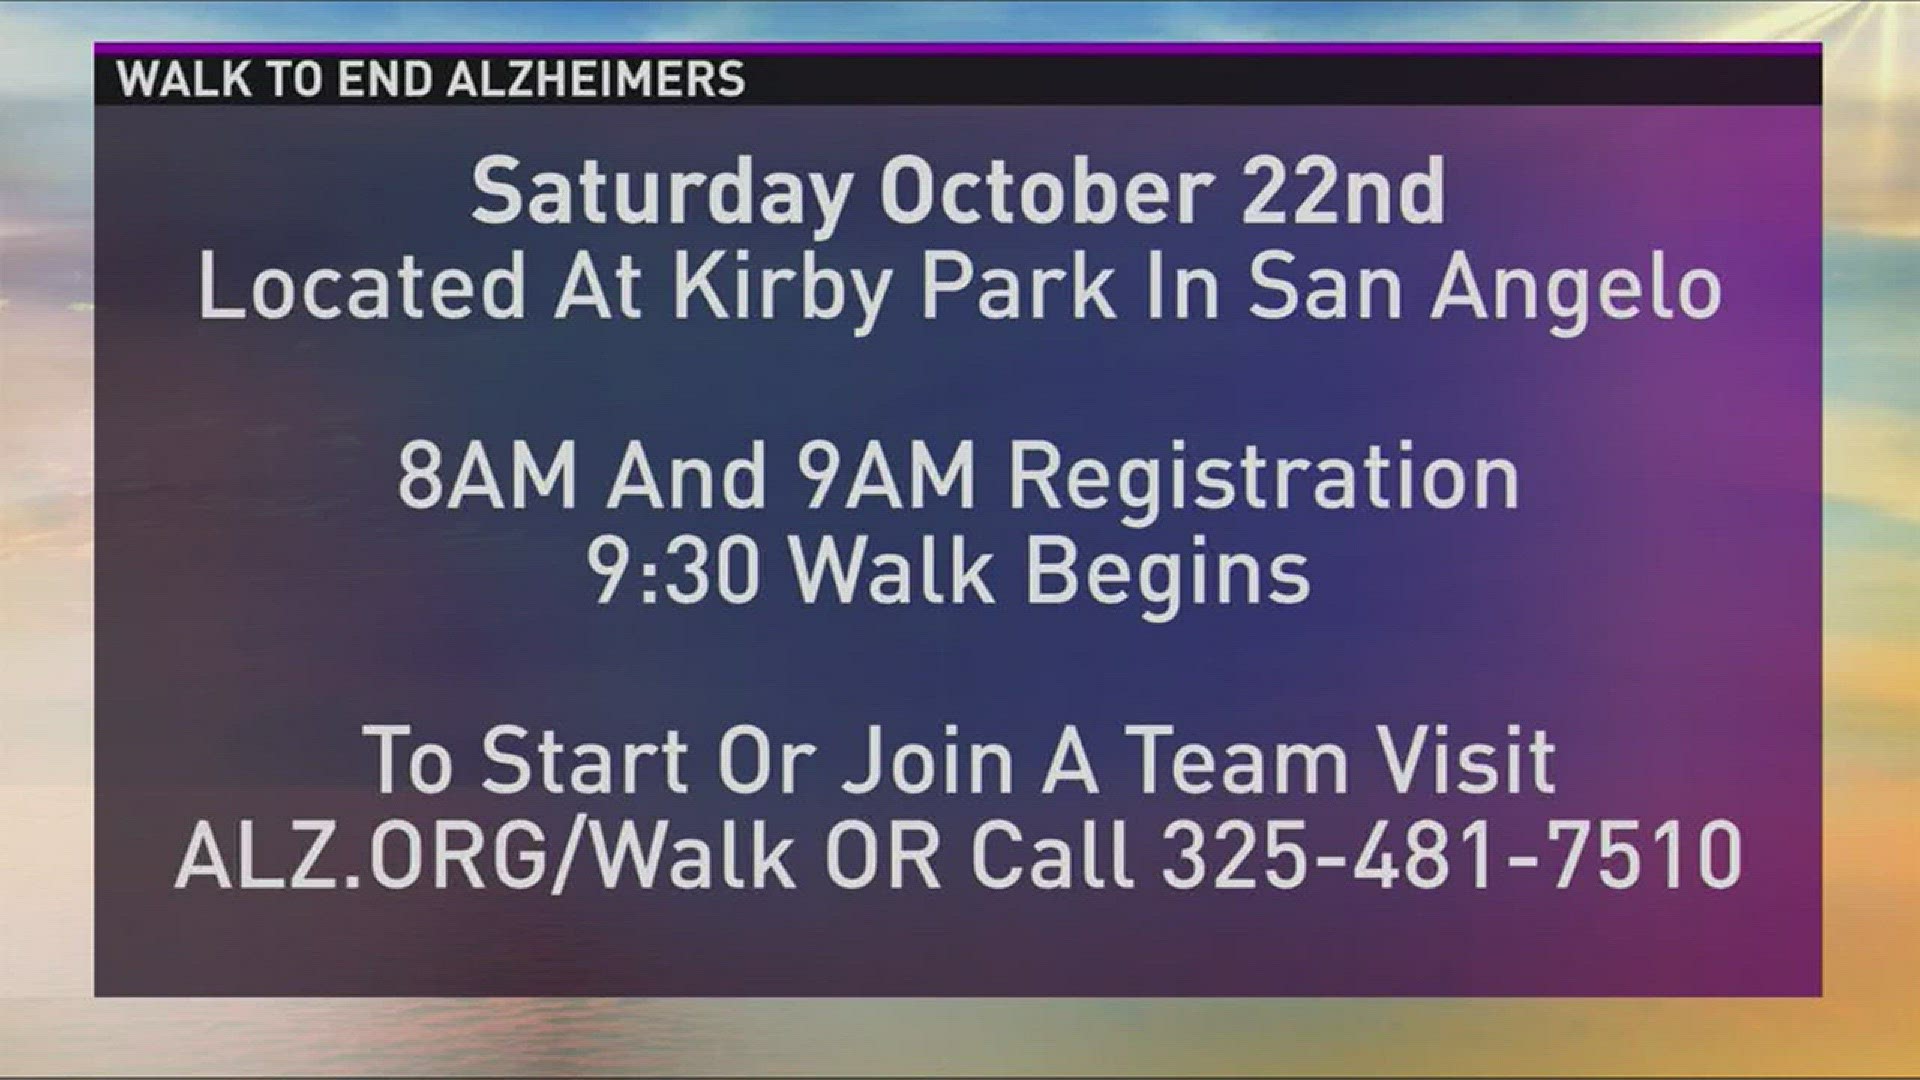 A special preview on an upcoming event to end Alzheimers.